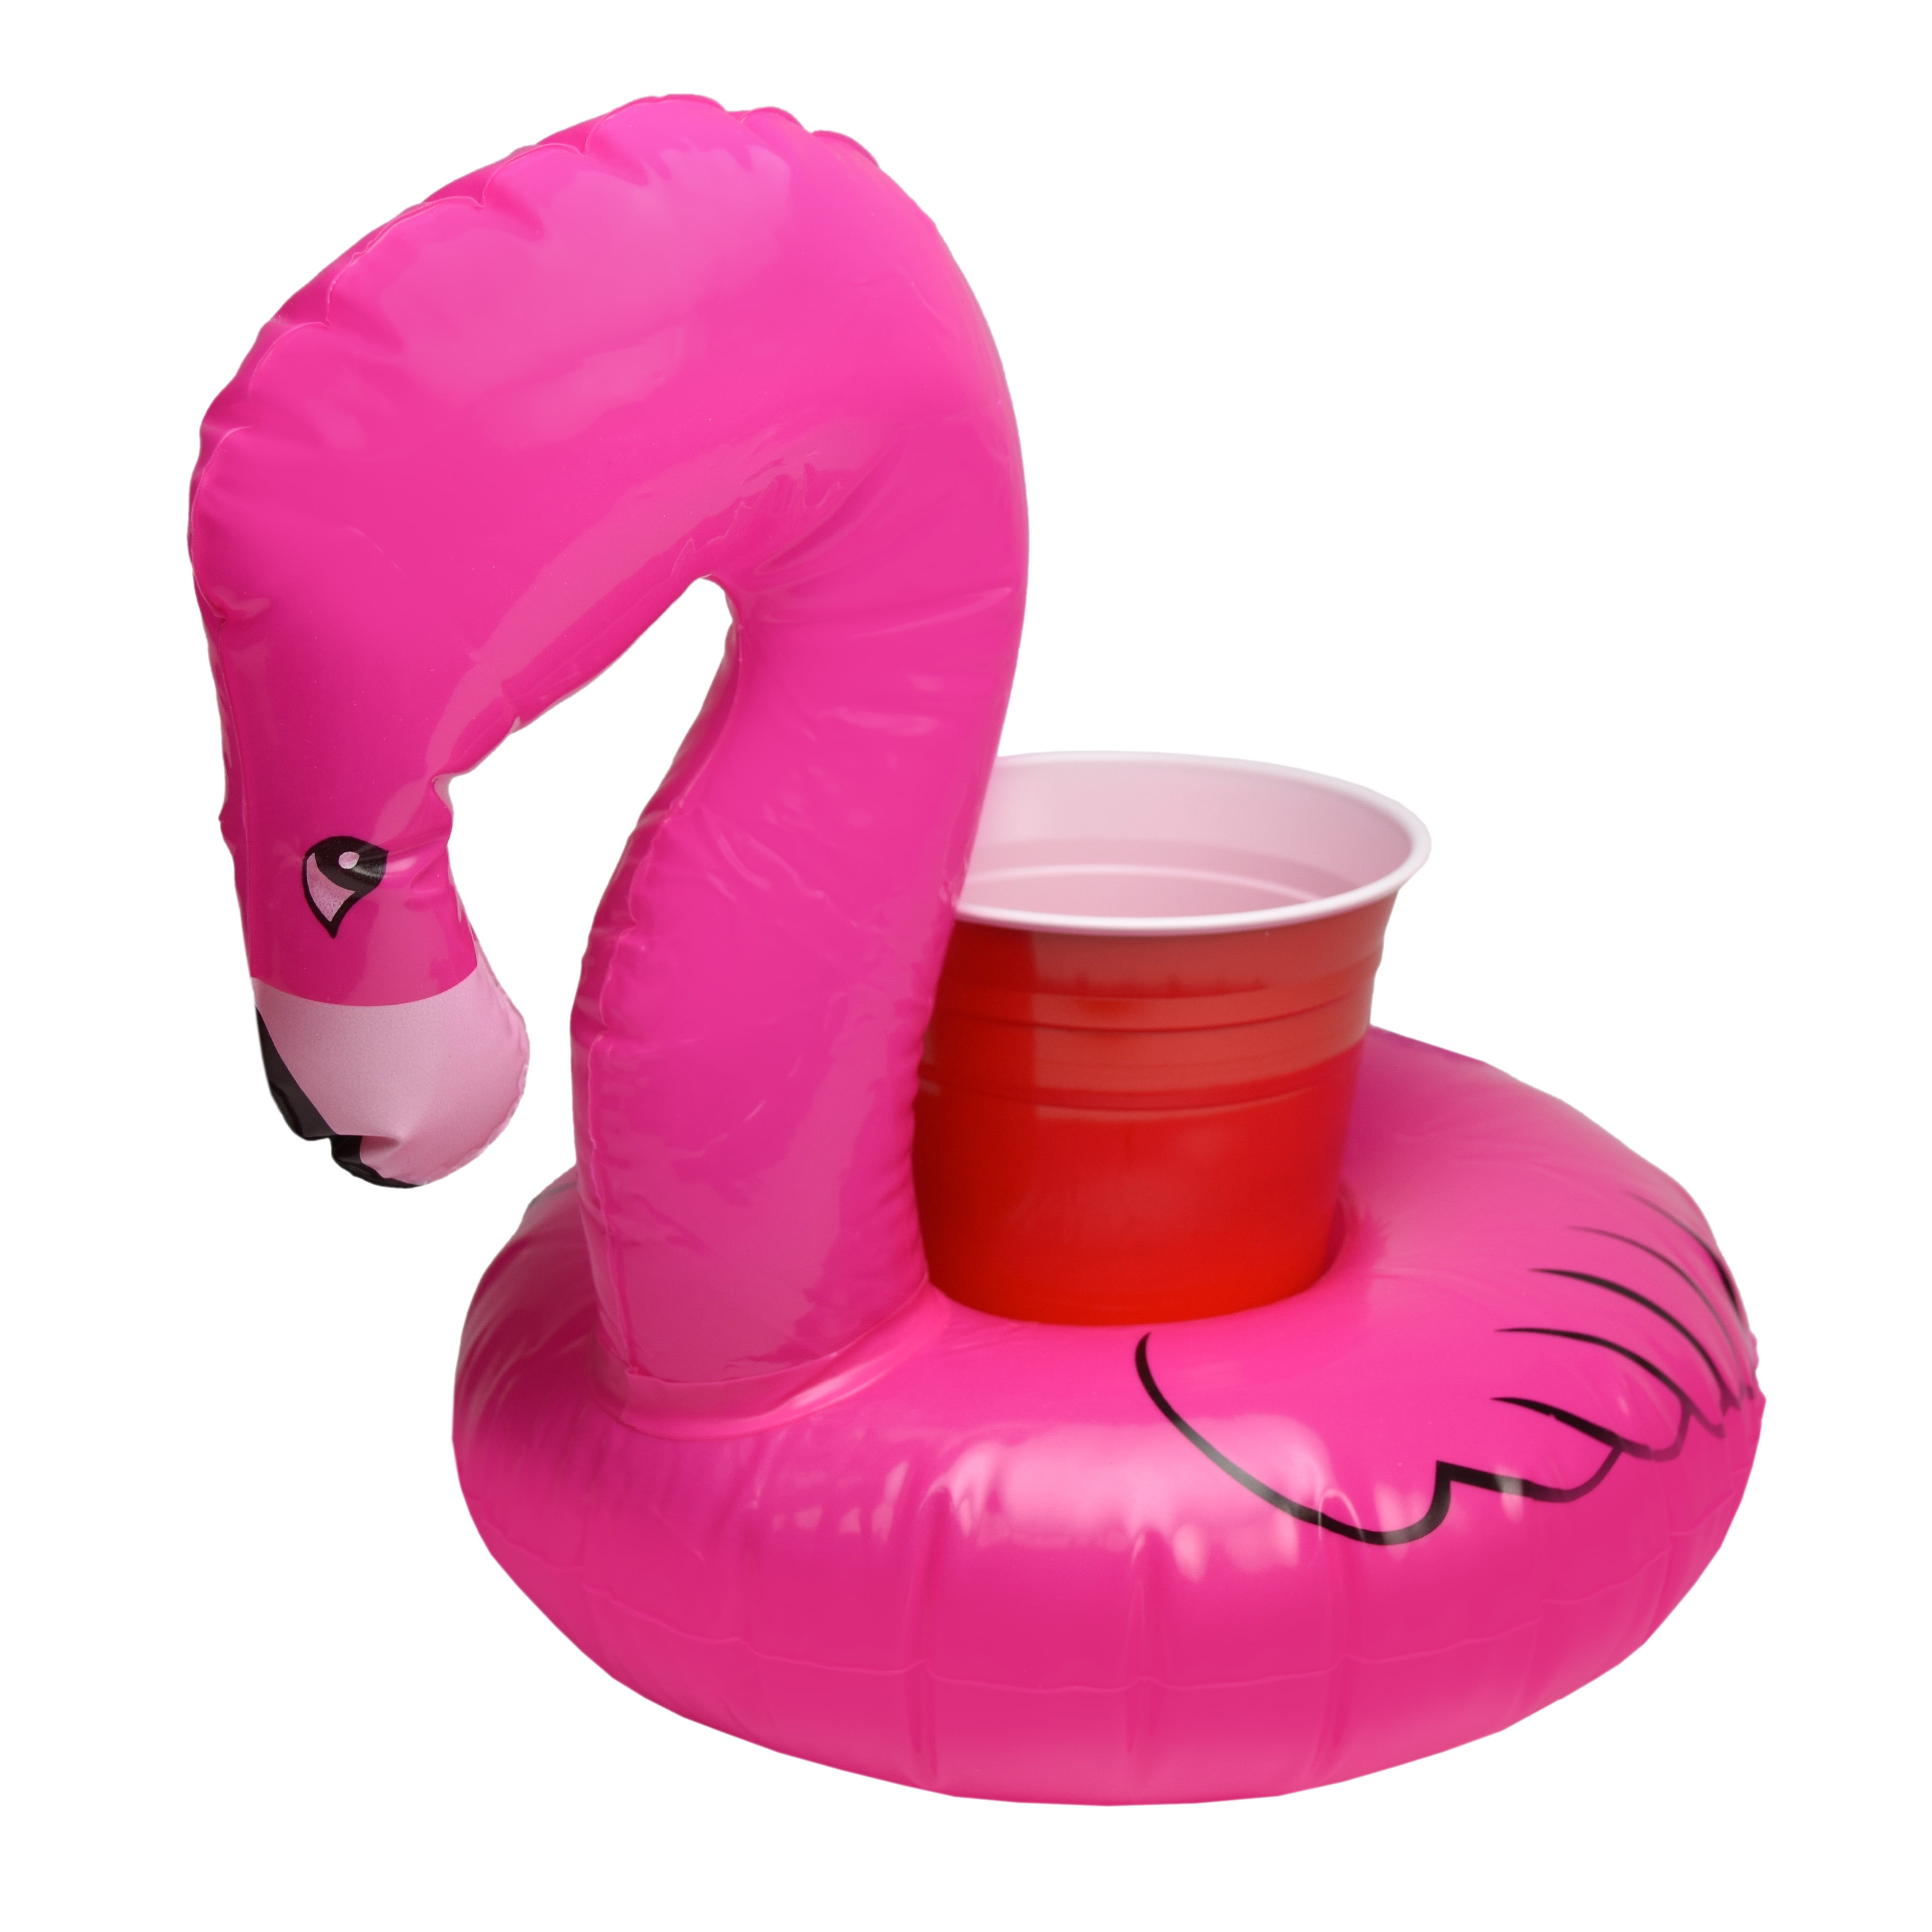 12 Pack Inflatable Flamingo Pool Float Drink Holder Pool Floats Toy for Flamingo Party Supplies Kids Bath Toys 